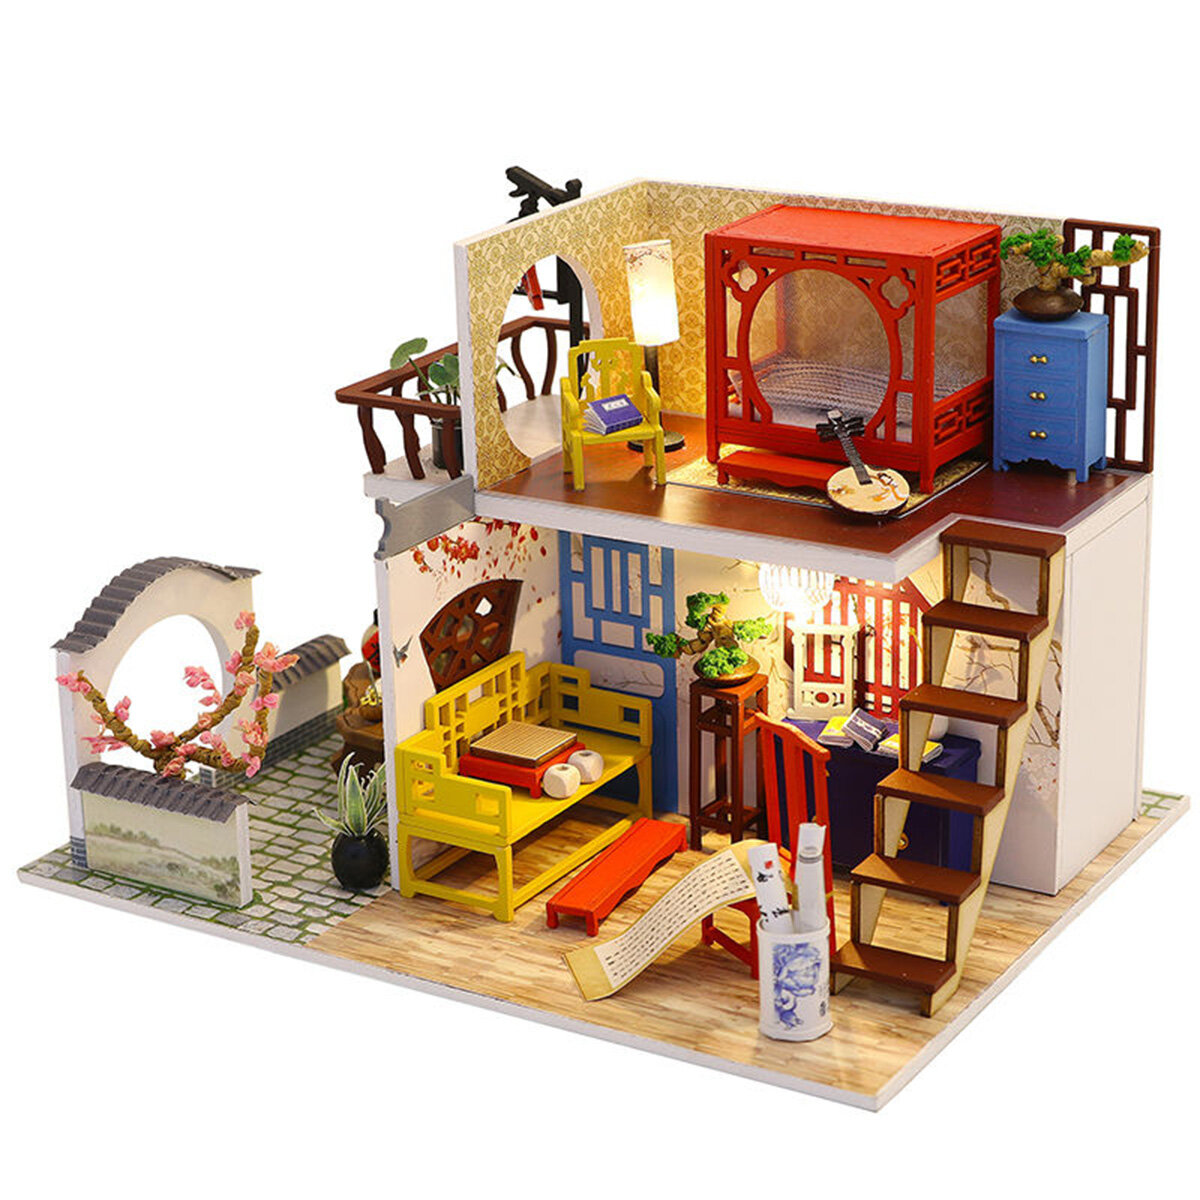 

1:24 Wooden DIY Handmade Assemble Doll House Miniature Furniture Kit Education Toy with LED Light for Kids Gift